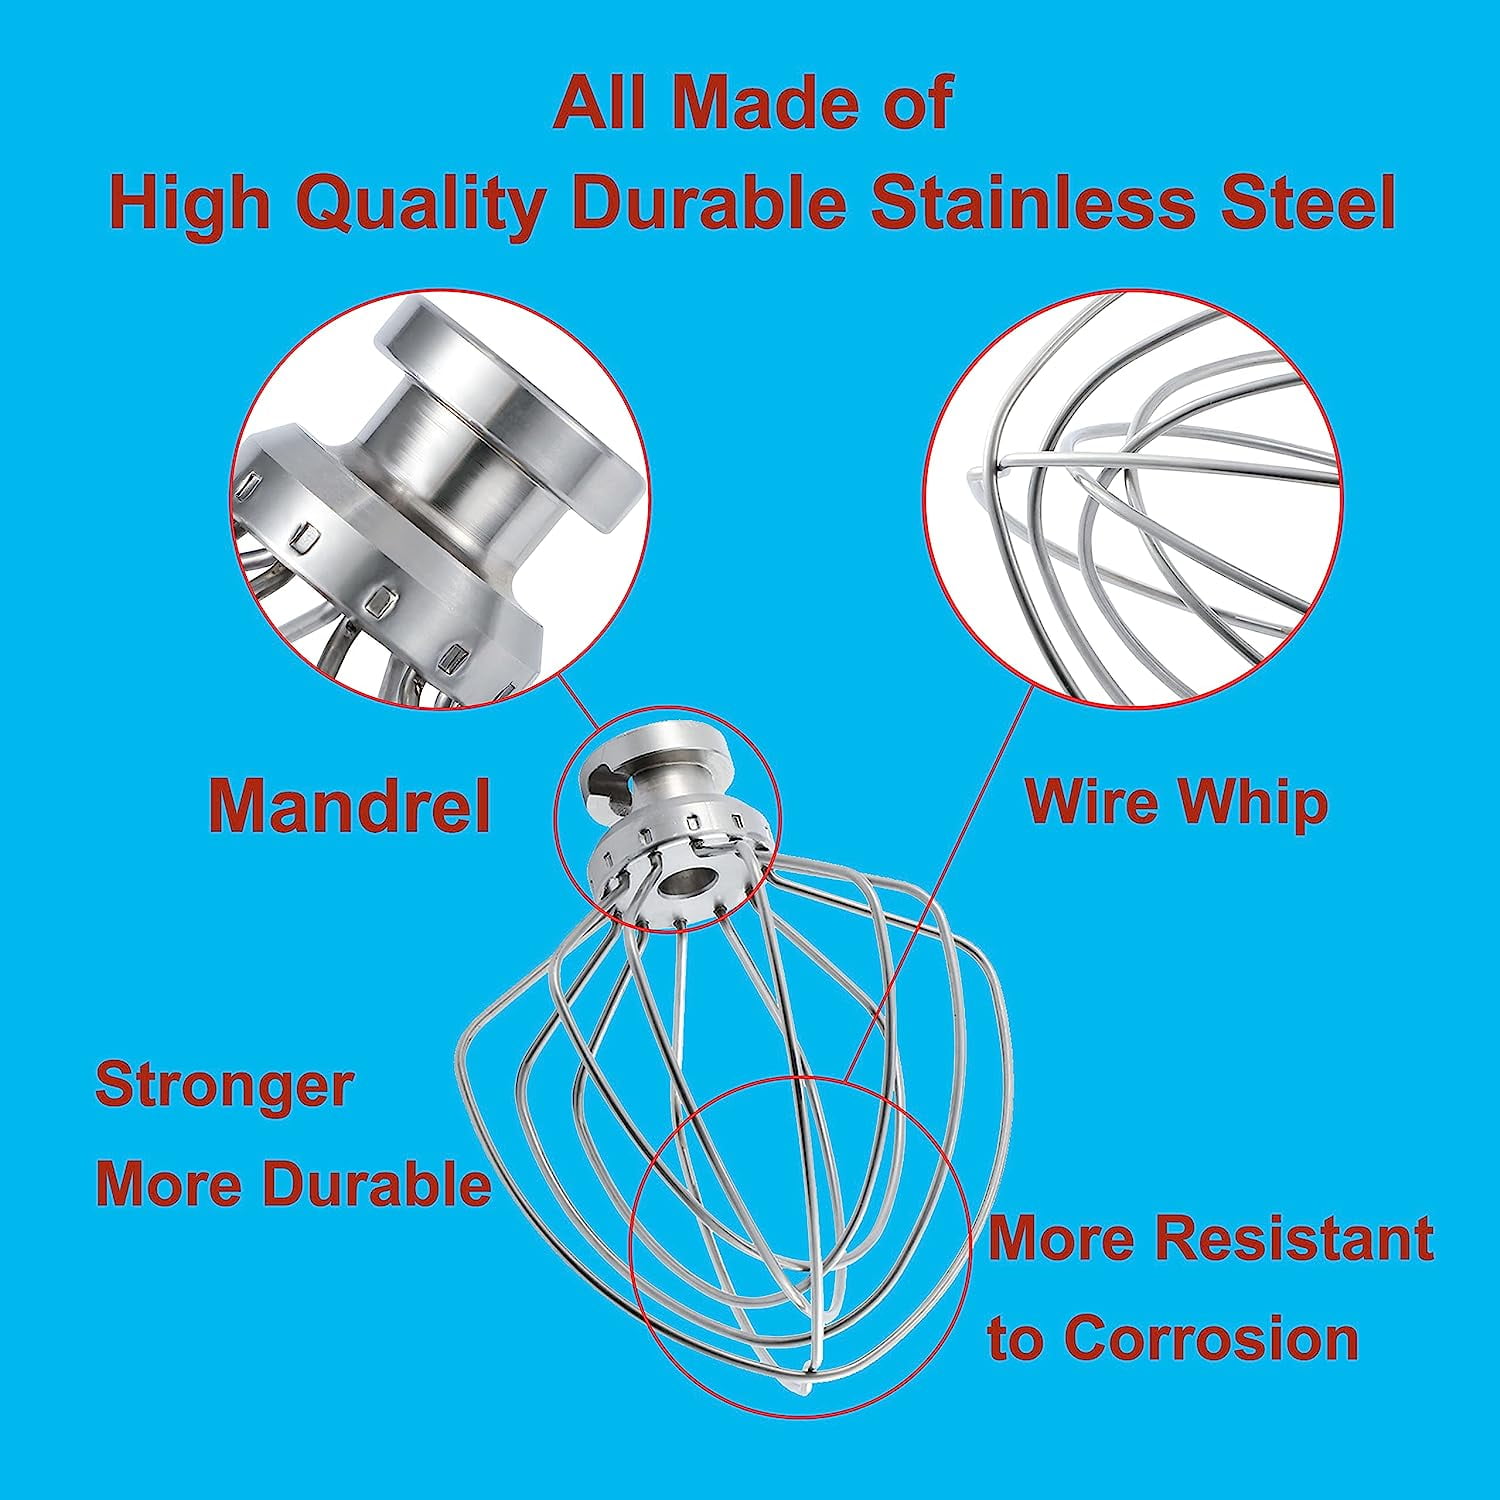 K45WW Stainless Steel 6-Wire Whip Attachment for KitchenAid 4.5